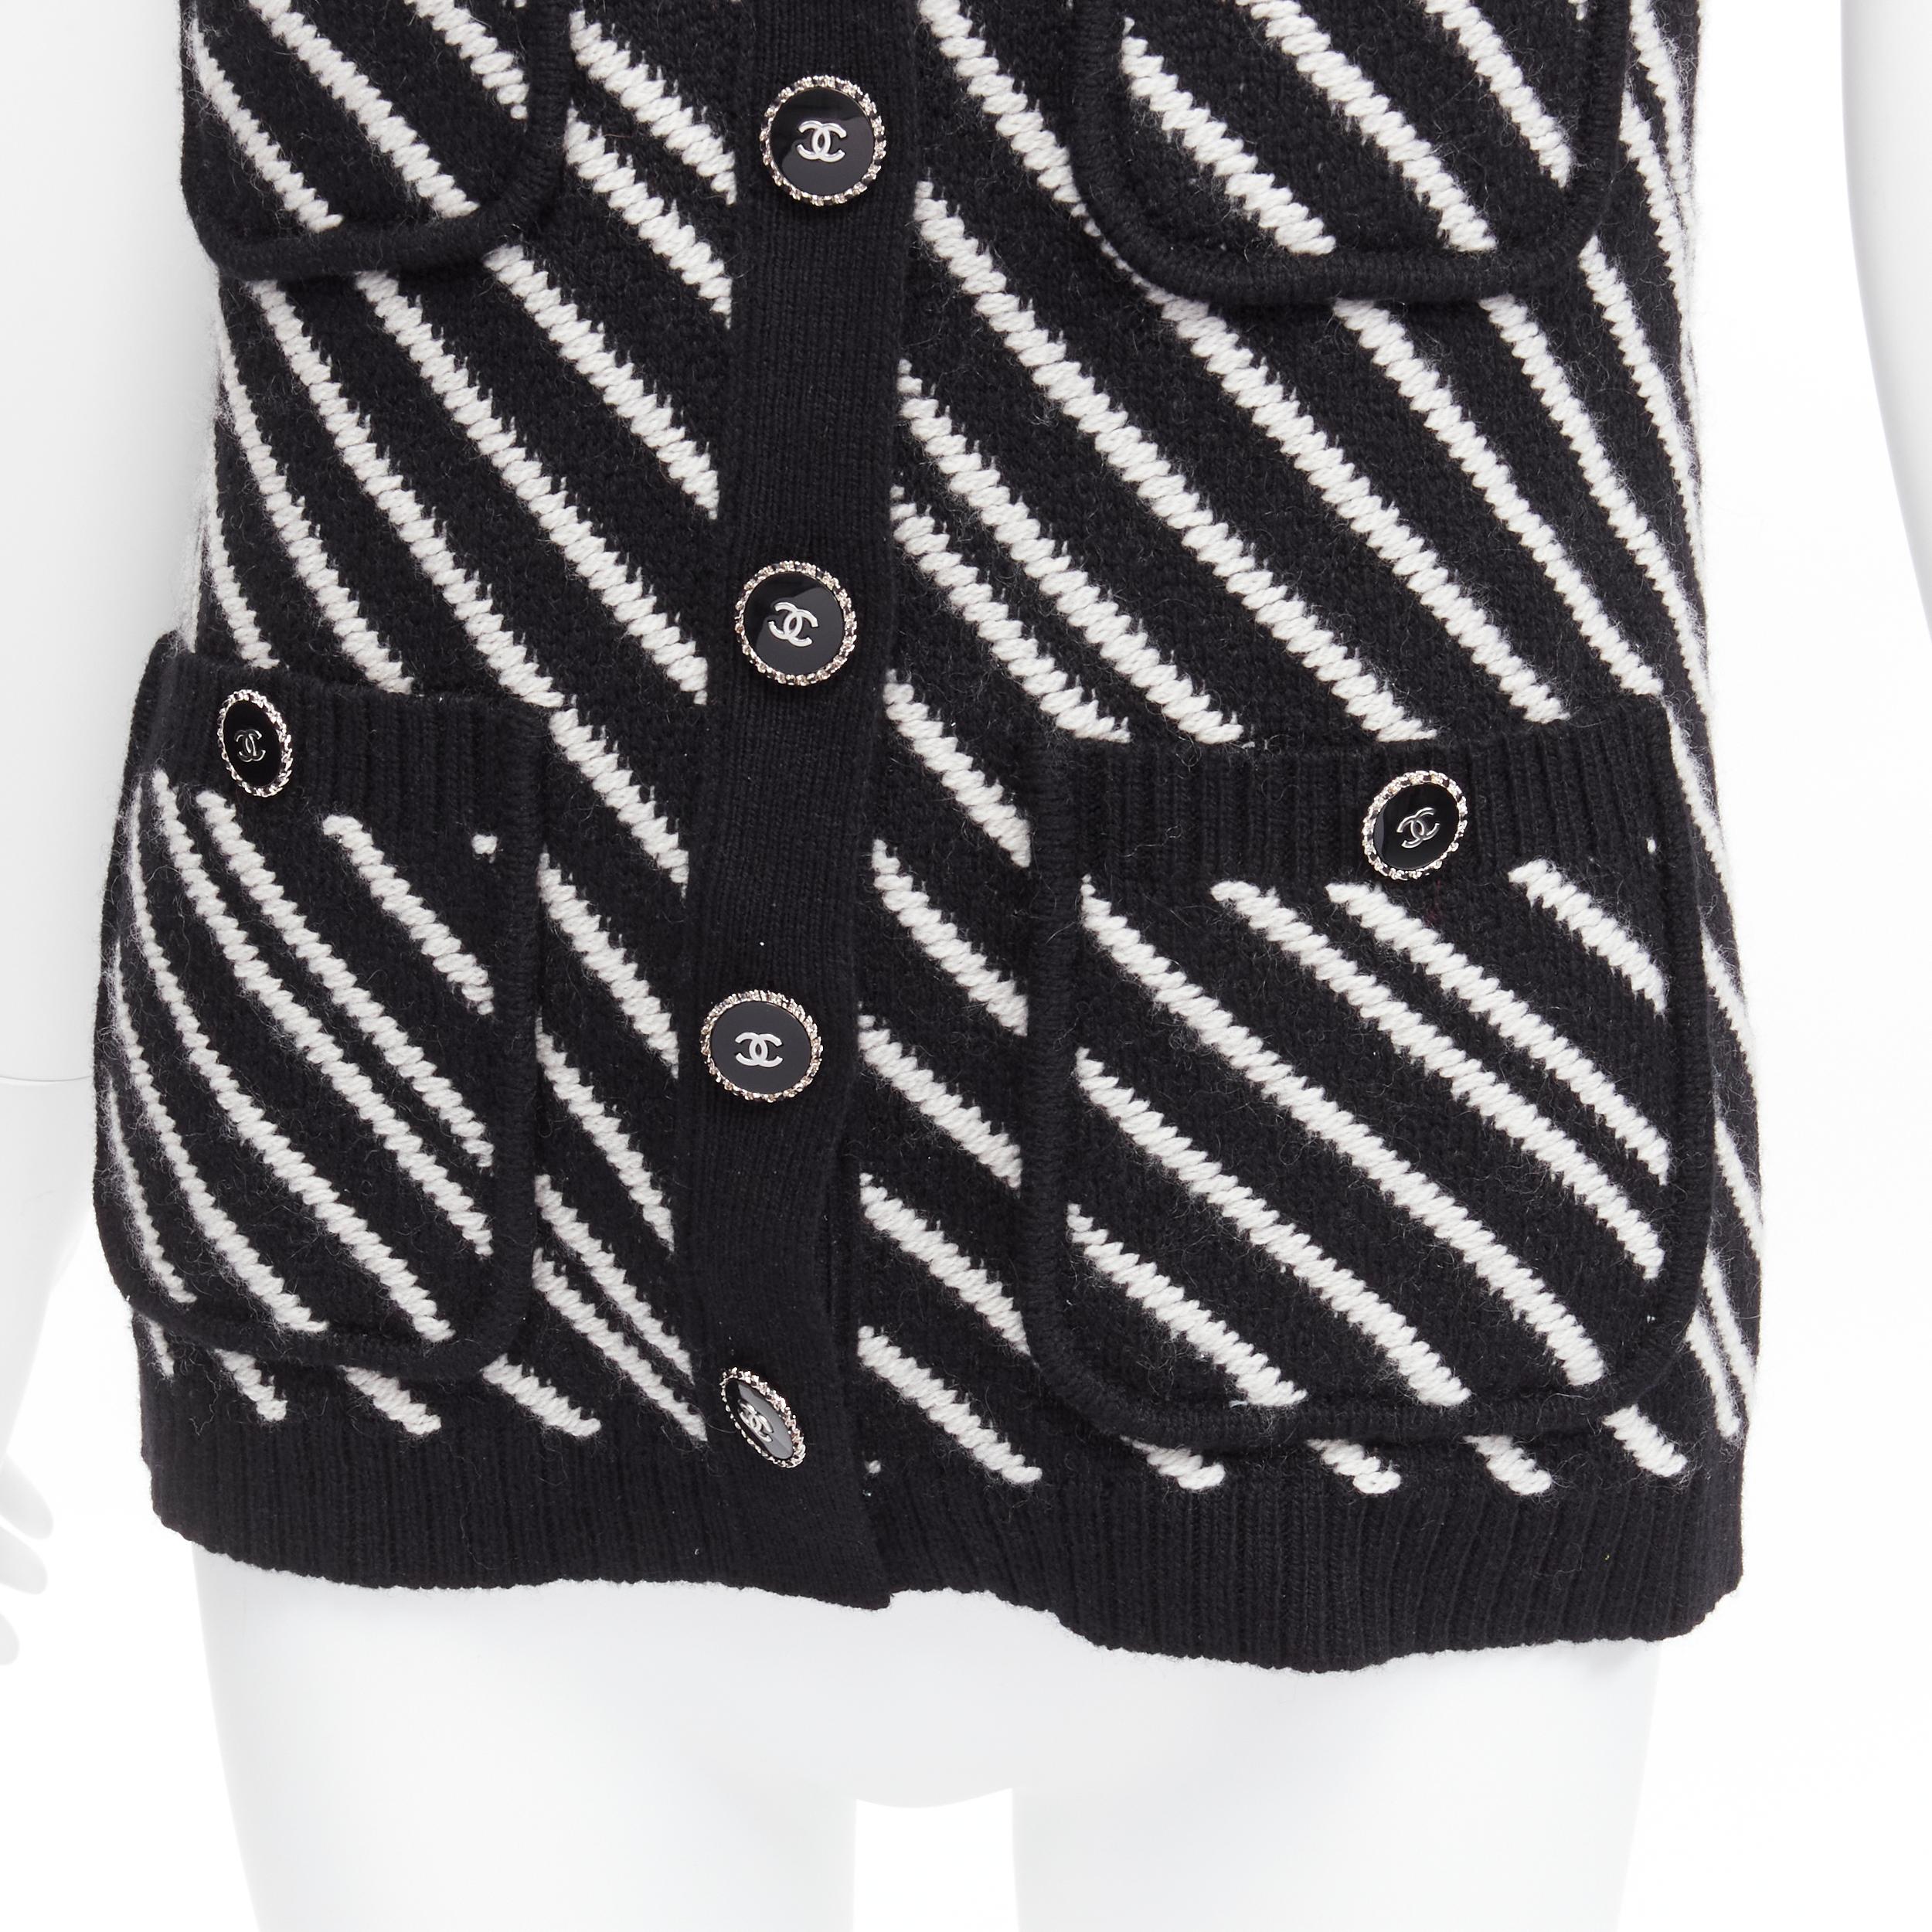 CHANEL 100% cashmere black white graphic stripes 4 pocket vest jacket FR34 XS
Reference: AAWC/A00460
Brand: Chanel
Designer: Virginie Viard
Collection: 2022
Material: Cashmere
Color: Black, White
Pattern: Striped
Closure: Button
Extra Details: CC